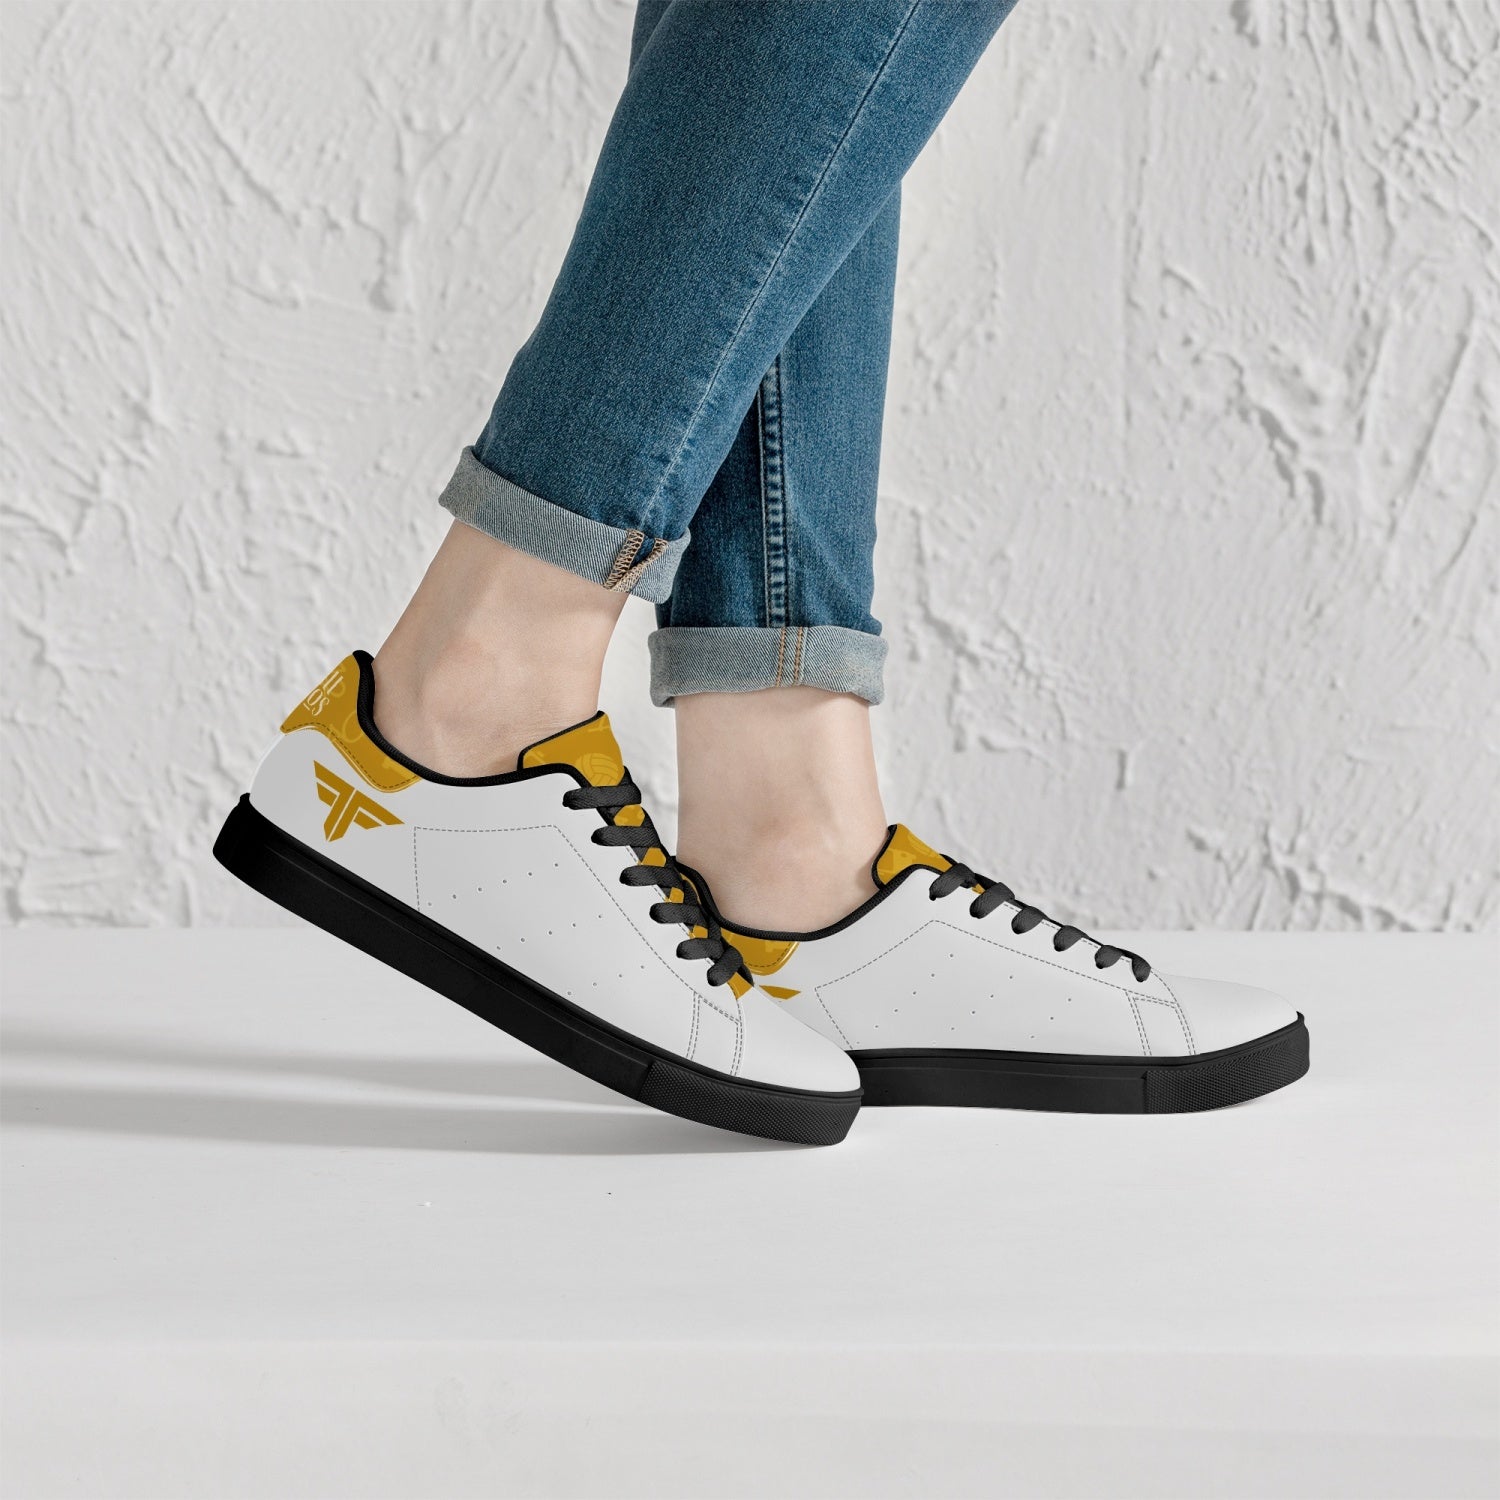 190. Classic Low-Top Leather Sneakers - White/Black